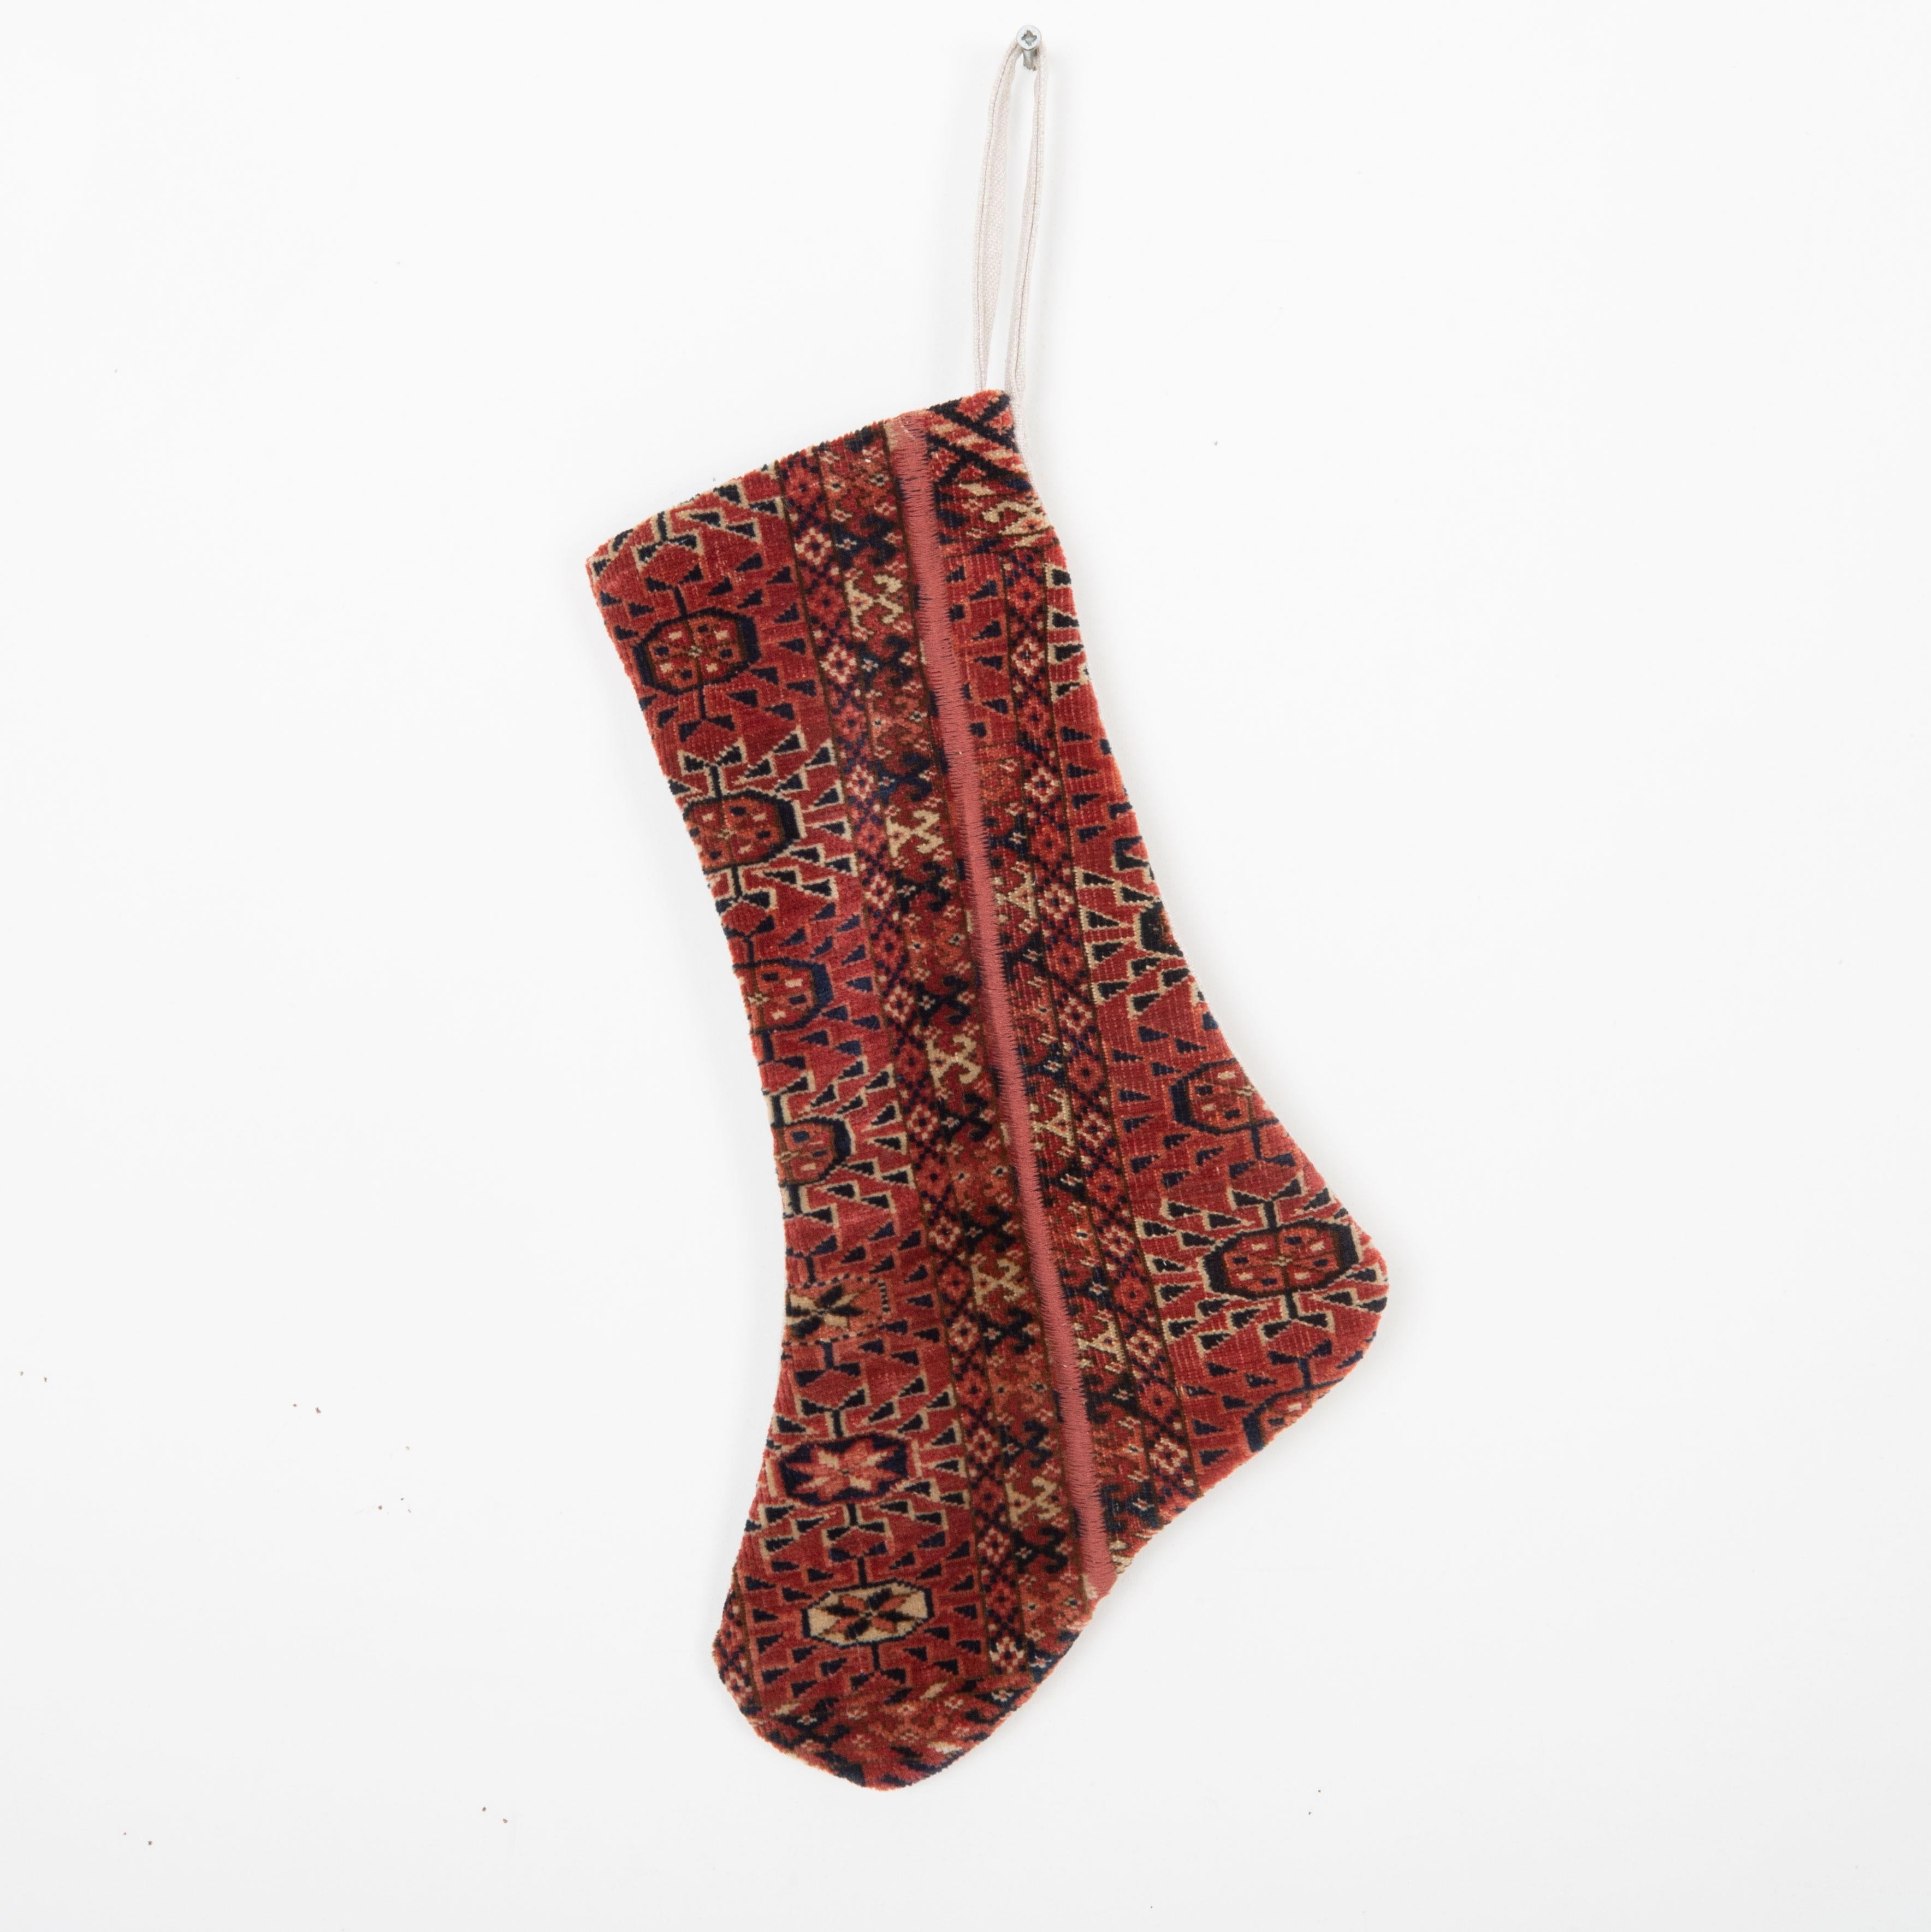 This Christmas Stocking was made from a late 19th or Early 20th C. Turkmen rug fragments.
Linen in the back.

Please note, this stocking was made from Turkmen rug fragments
